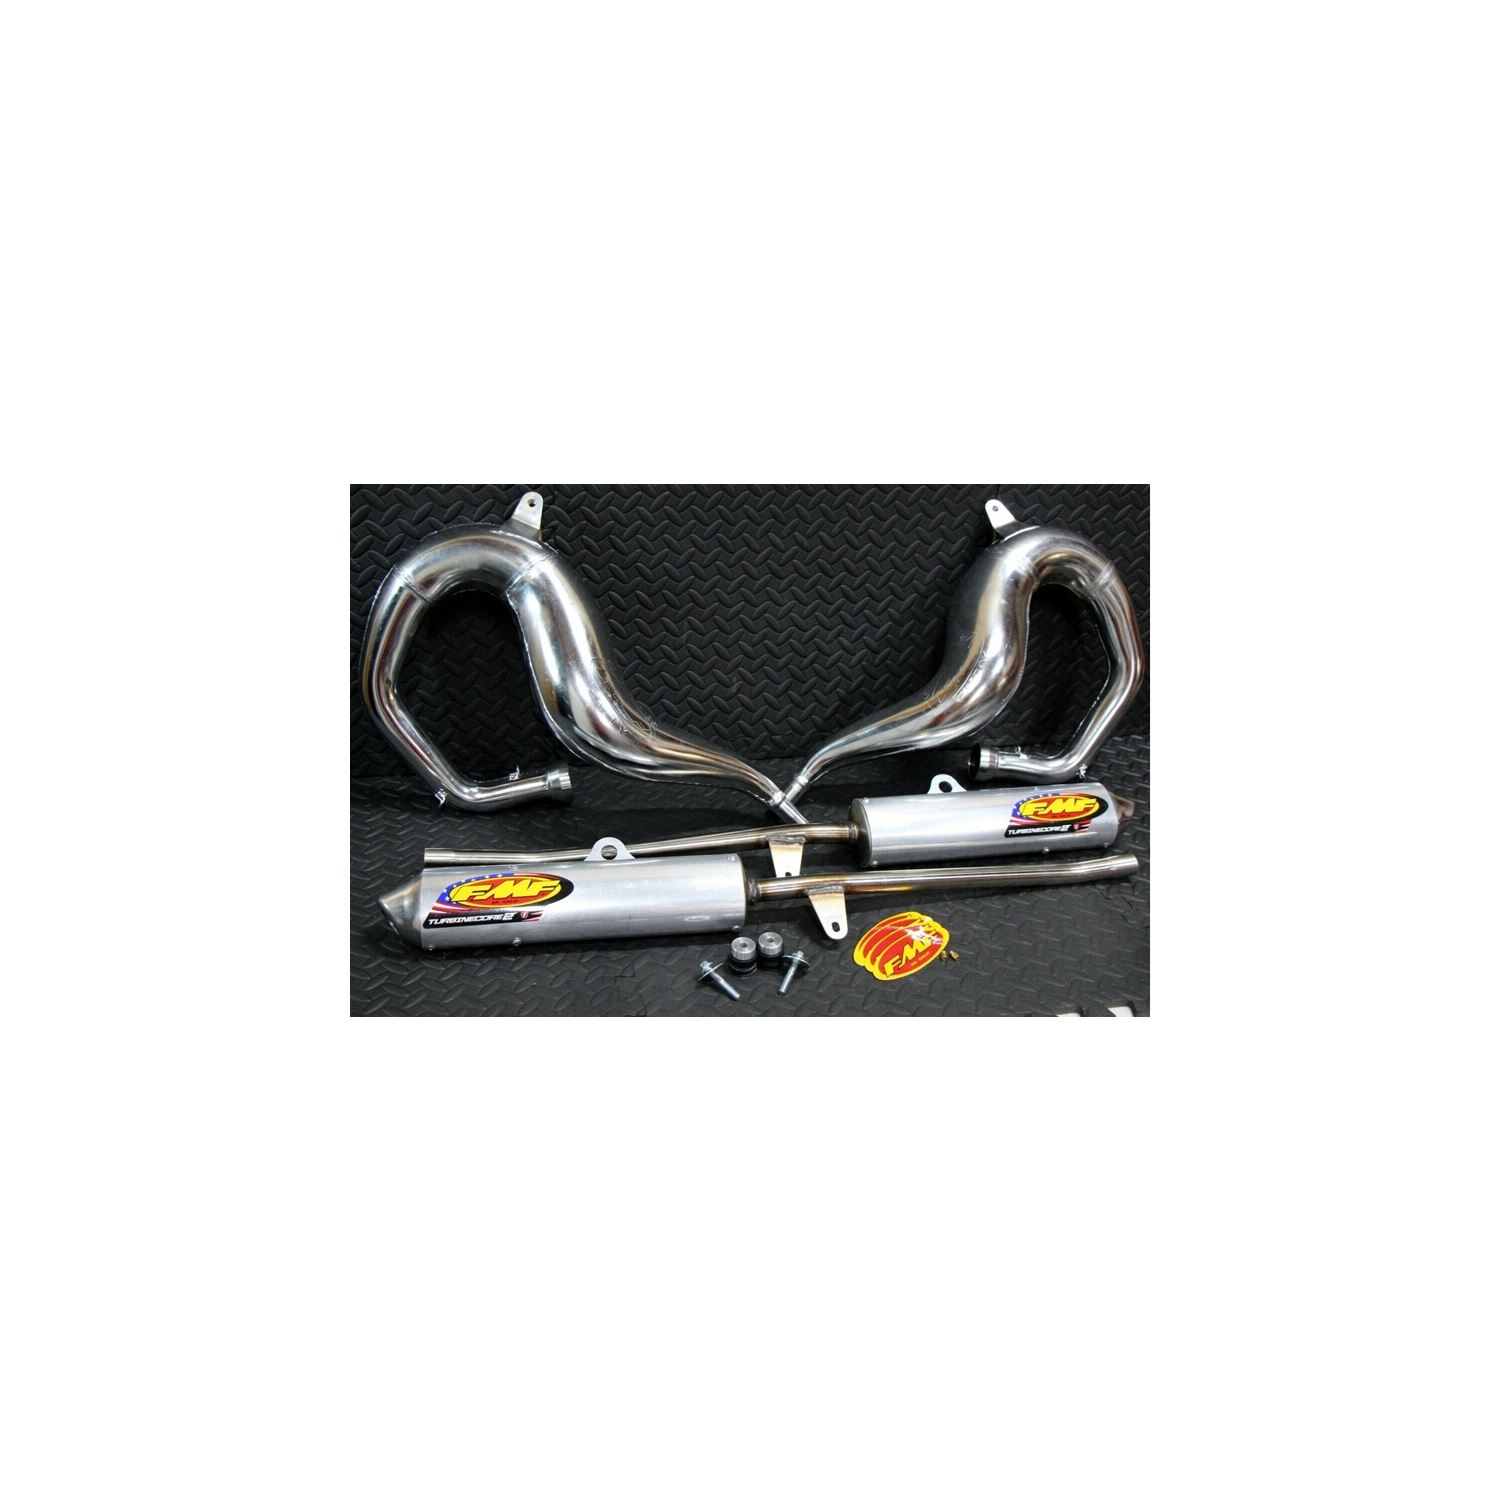 NEW FMF Fatty exhaust Pipes And Power core 2 silen